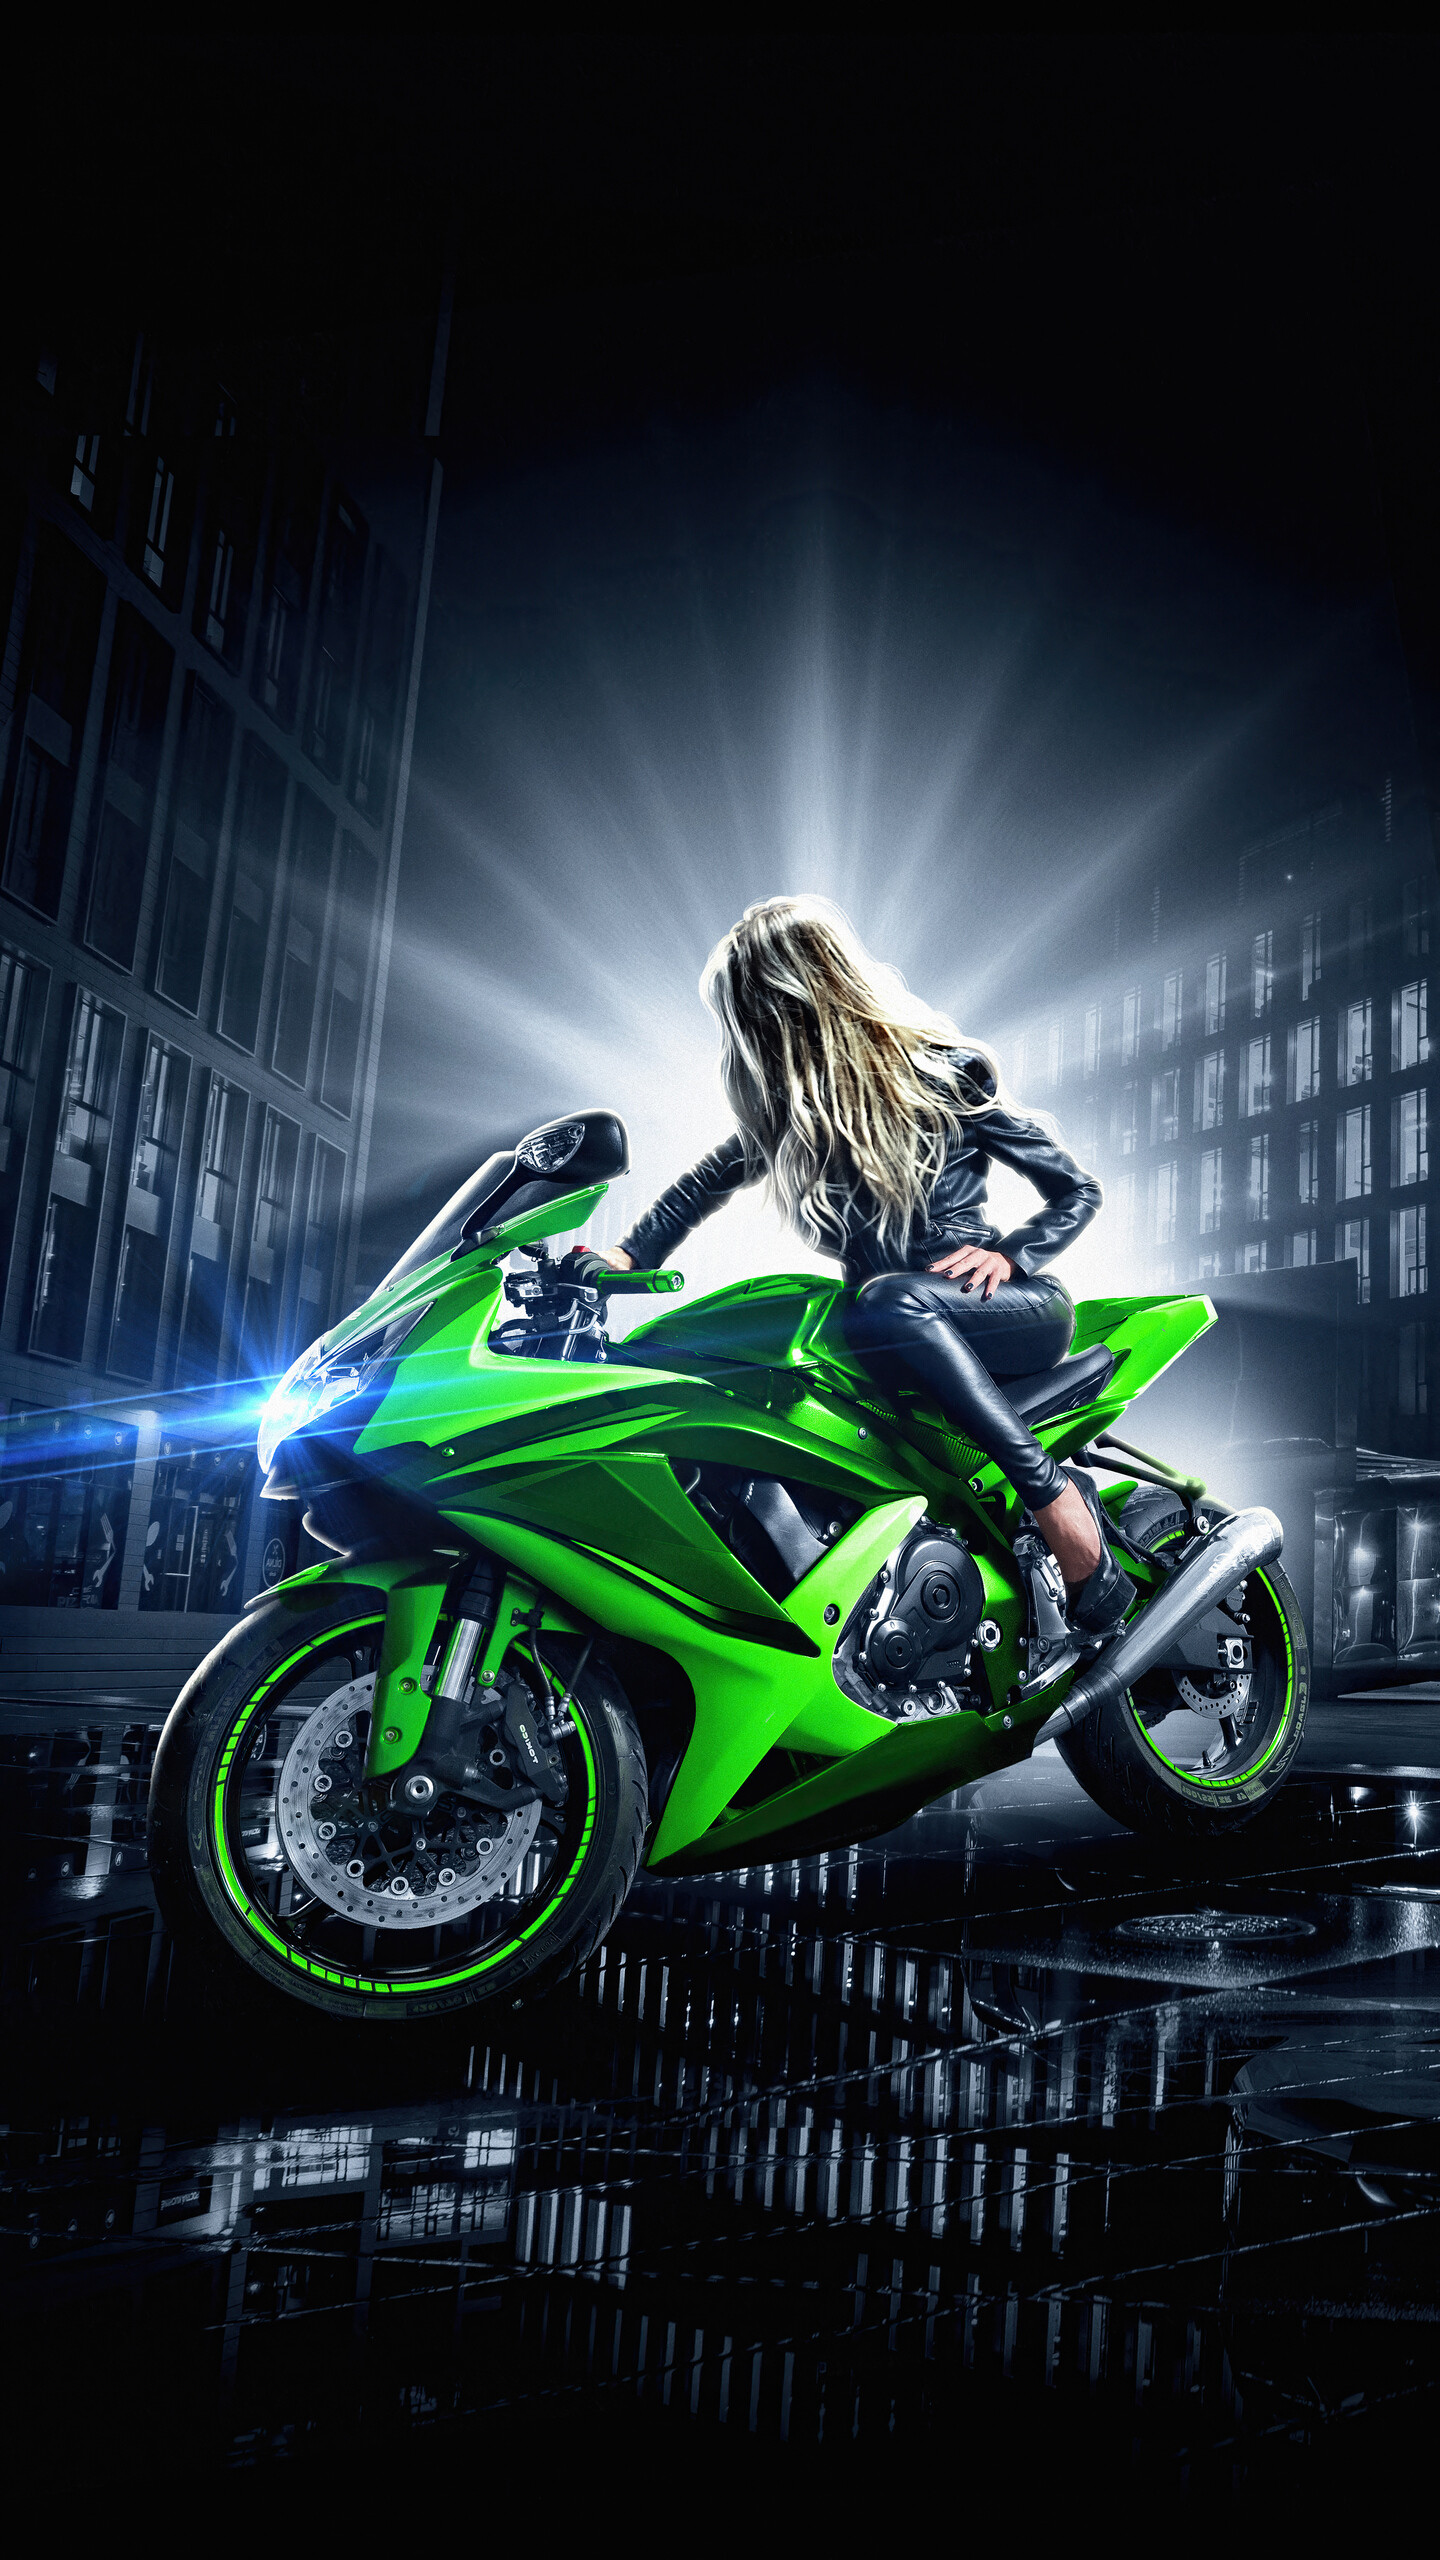 Girls and Motorcycles: Street bike, Futuristic, Leather motorcycle clothing, A female biker. 1440x2560 HD Wallpaper.